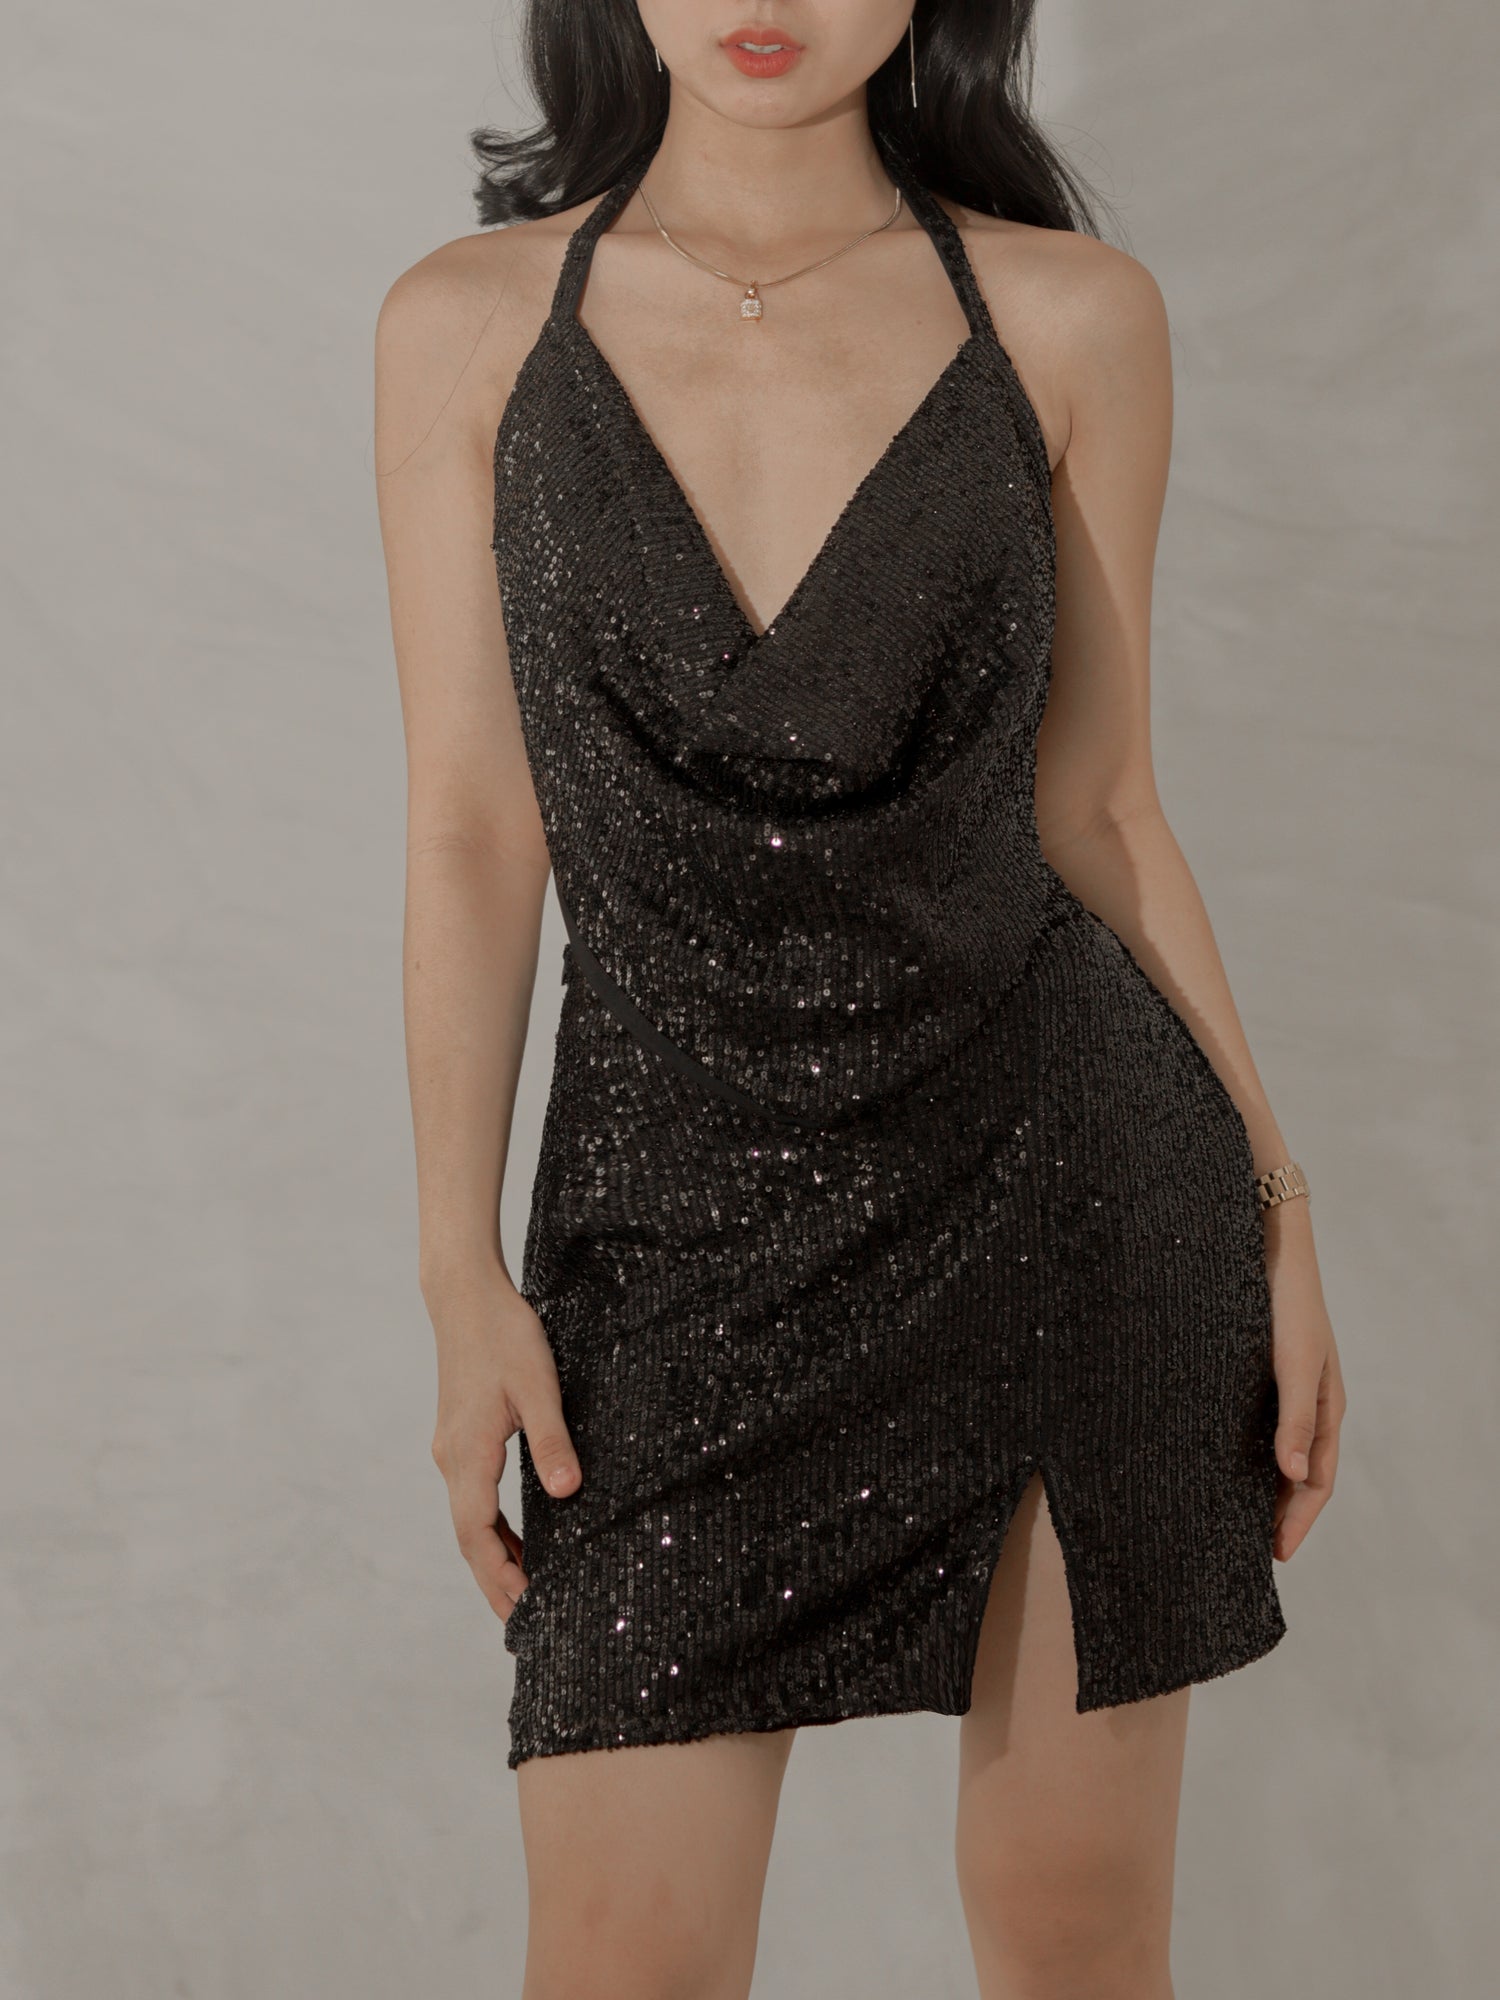 Moonlight Dancin' Cowl Sequined Backless Top and A-line Mini Skirt Set